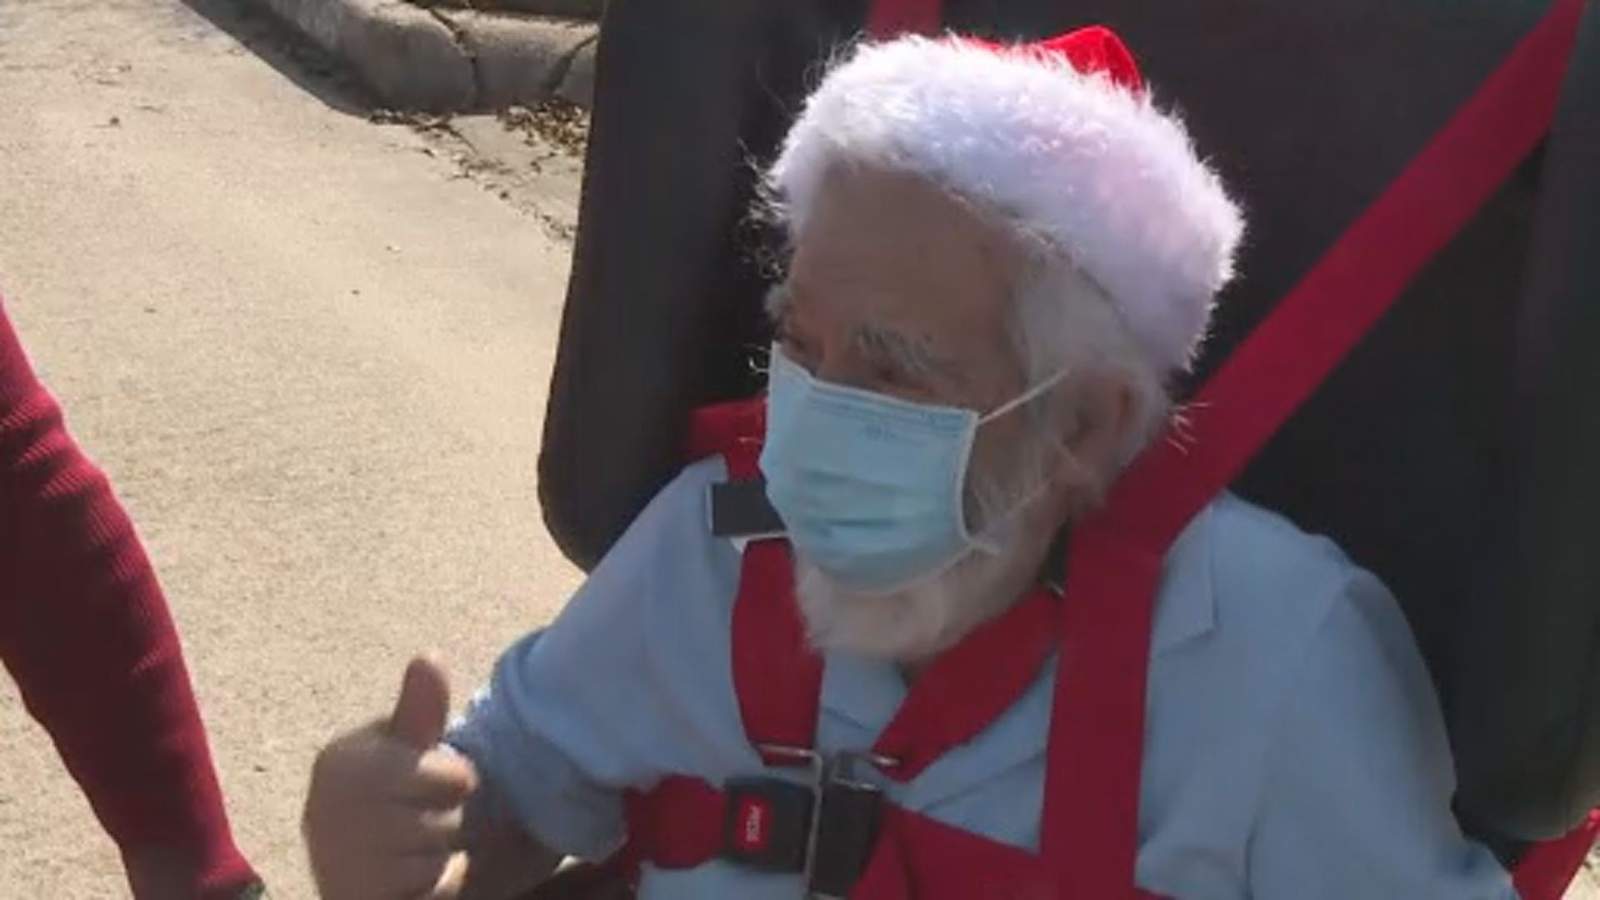 83-year-old Houston man returns home after long battle with COVID-19